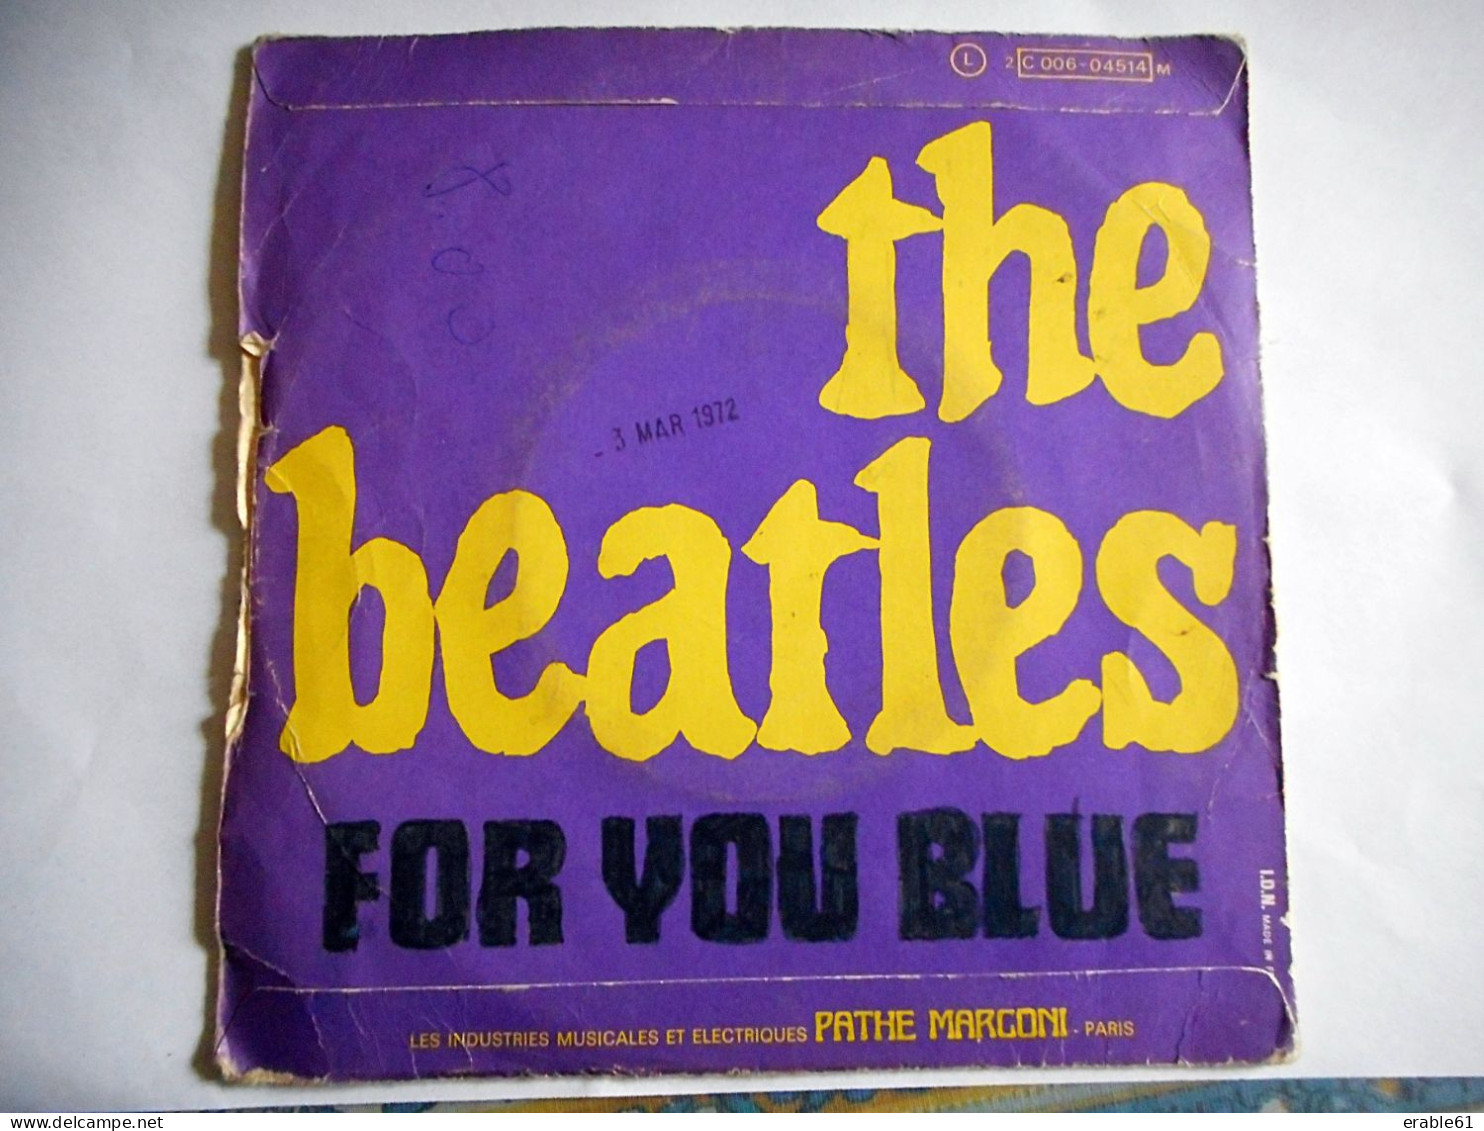 45 T THE BEATLES THE LONG AND WINDING ROAD FOR YOU BLUE - 45 Rpm - Maxi-Single